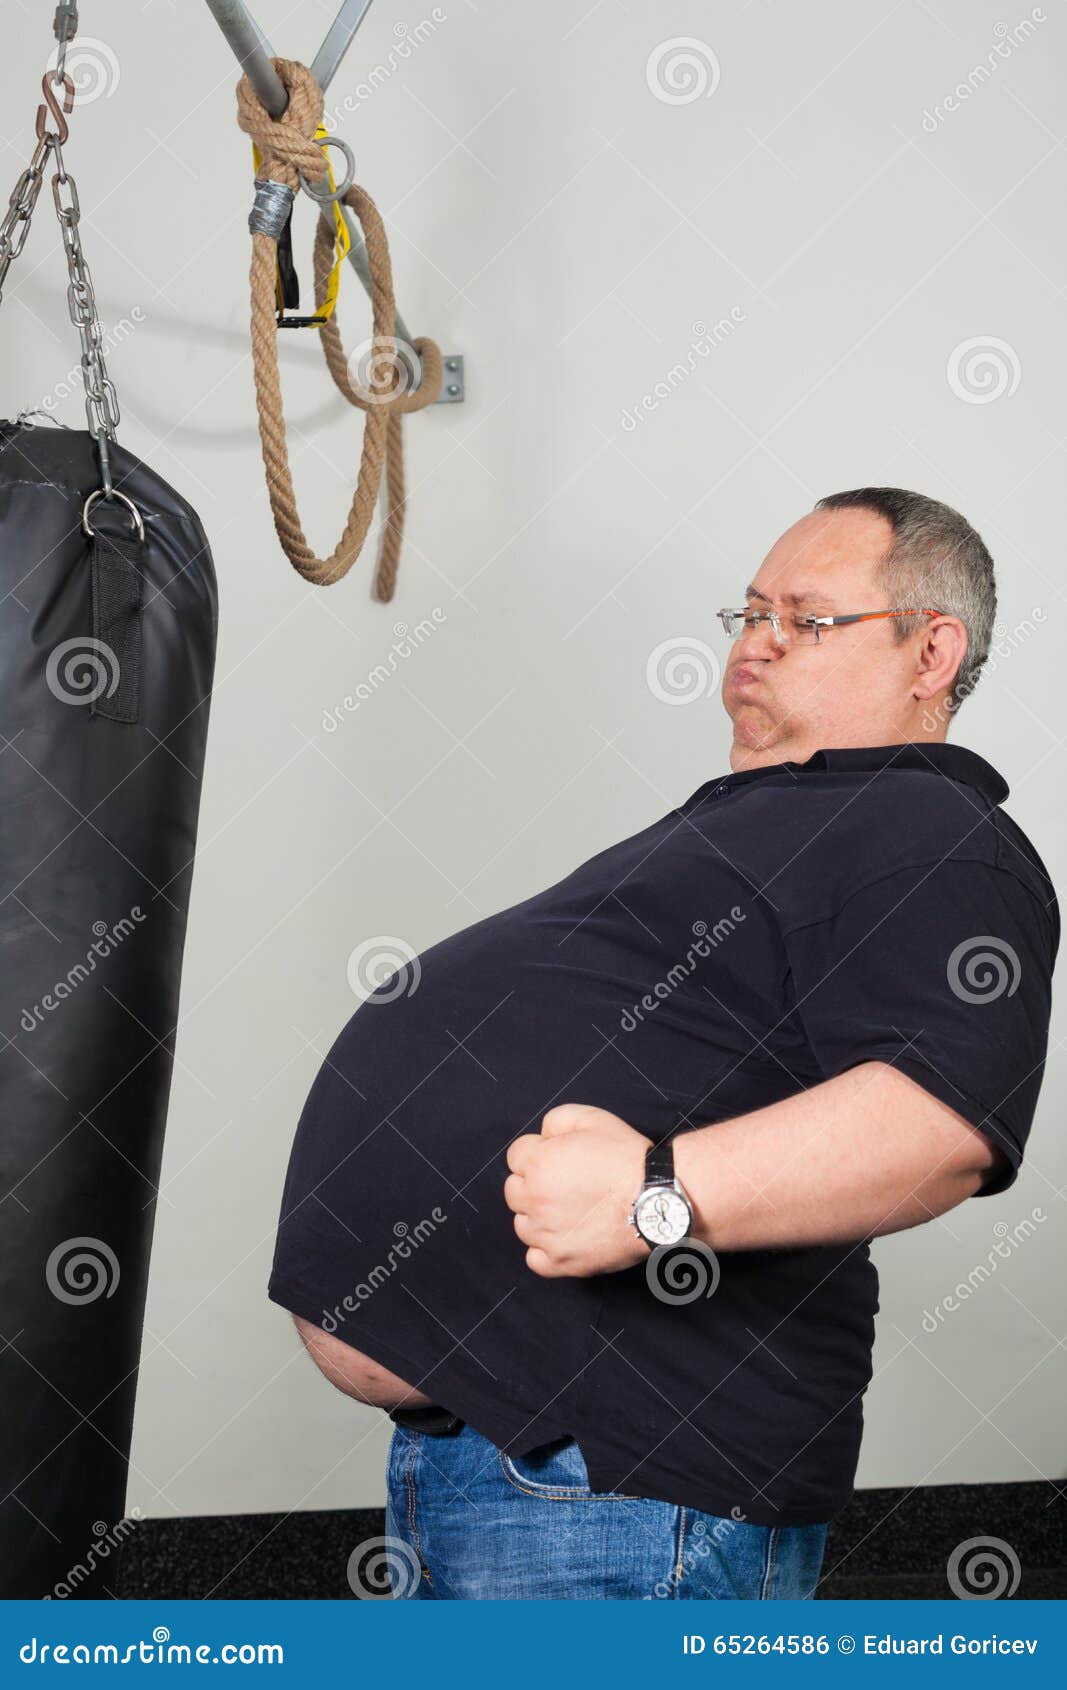 Bellypunching Bellypunching on